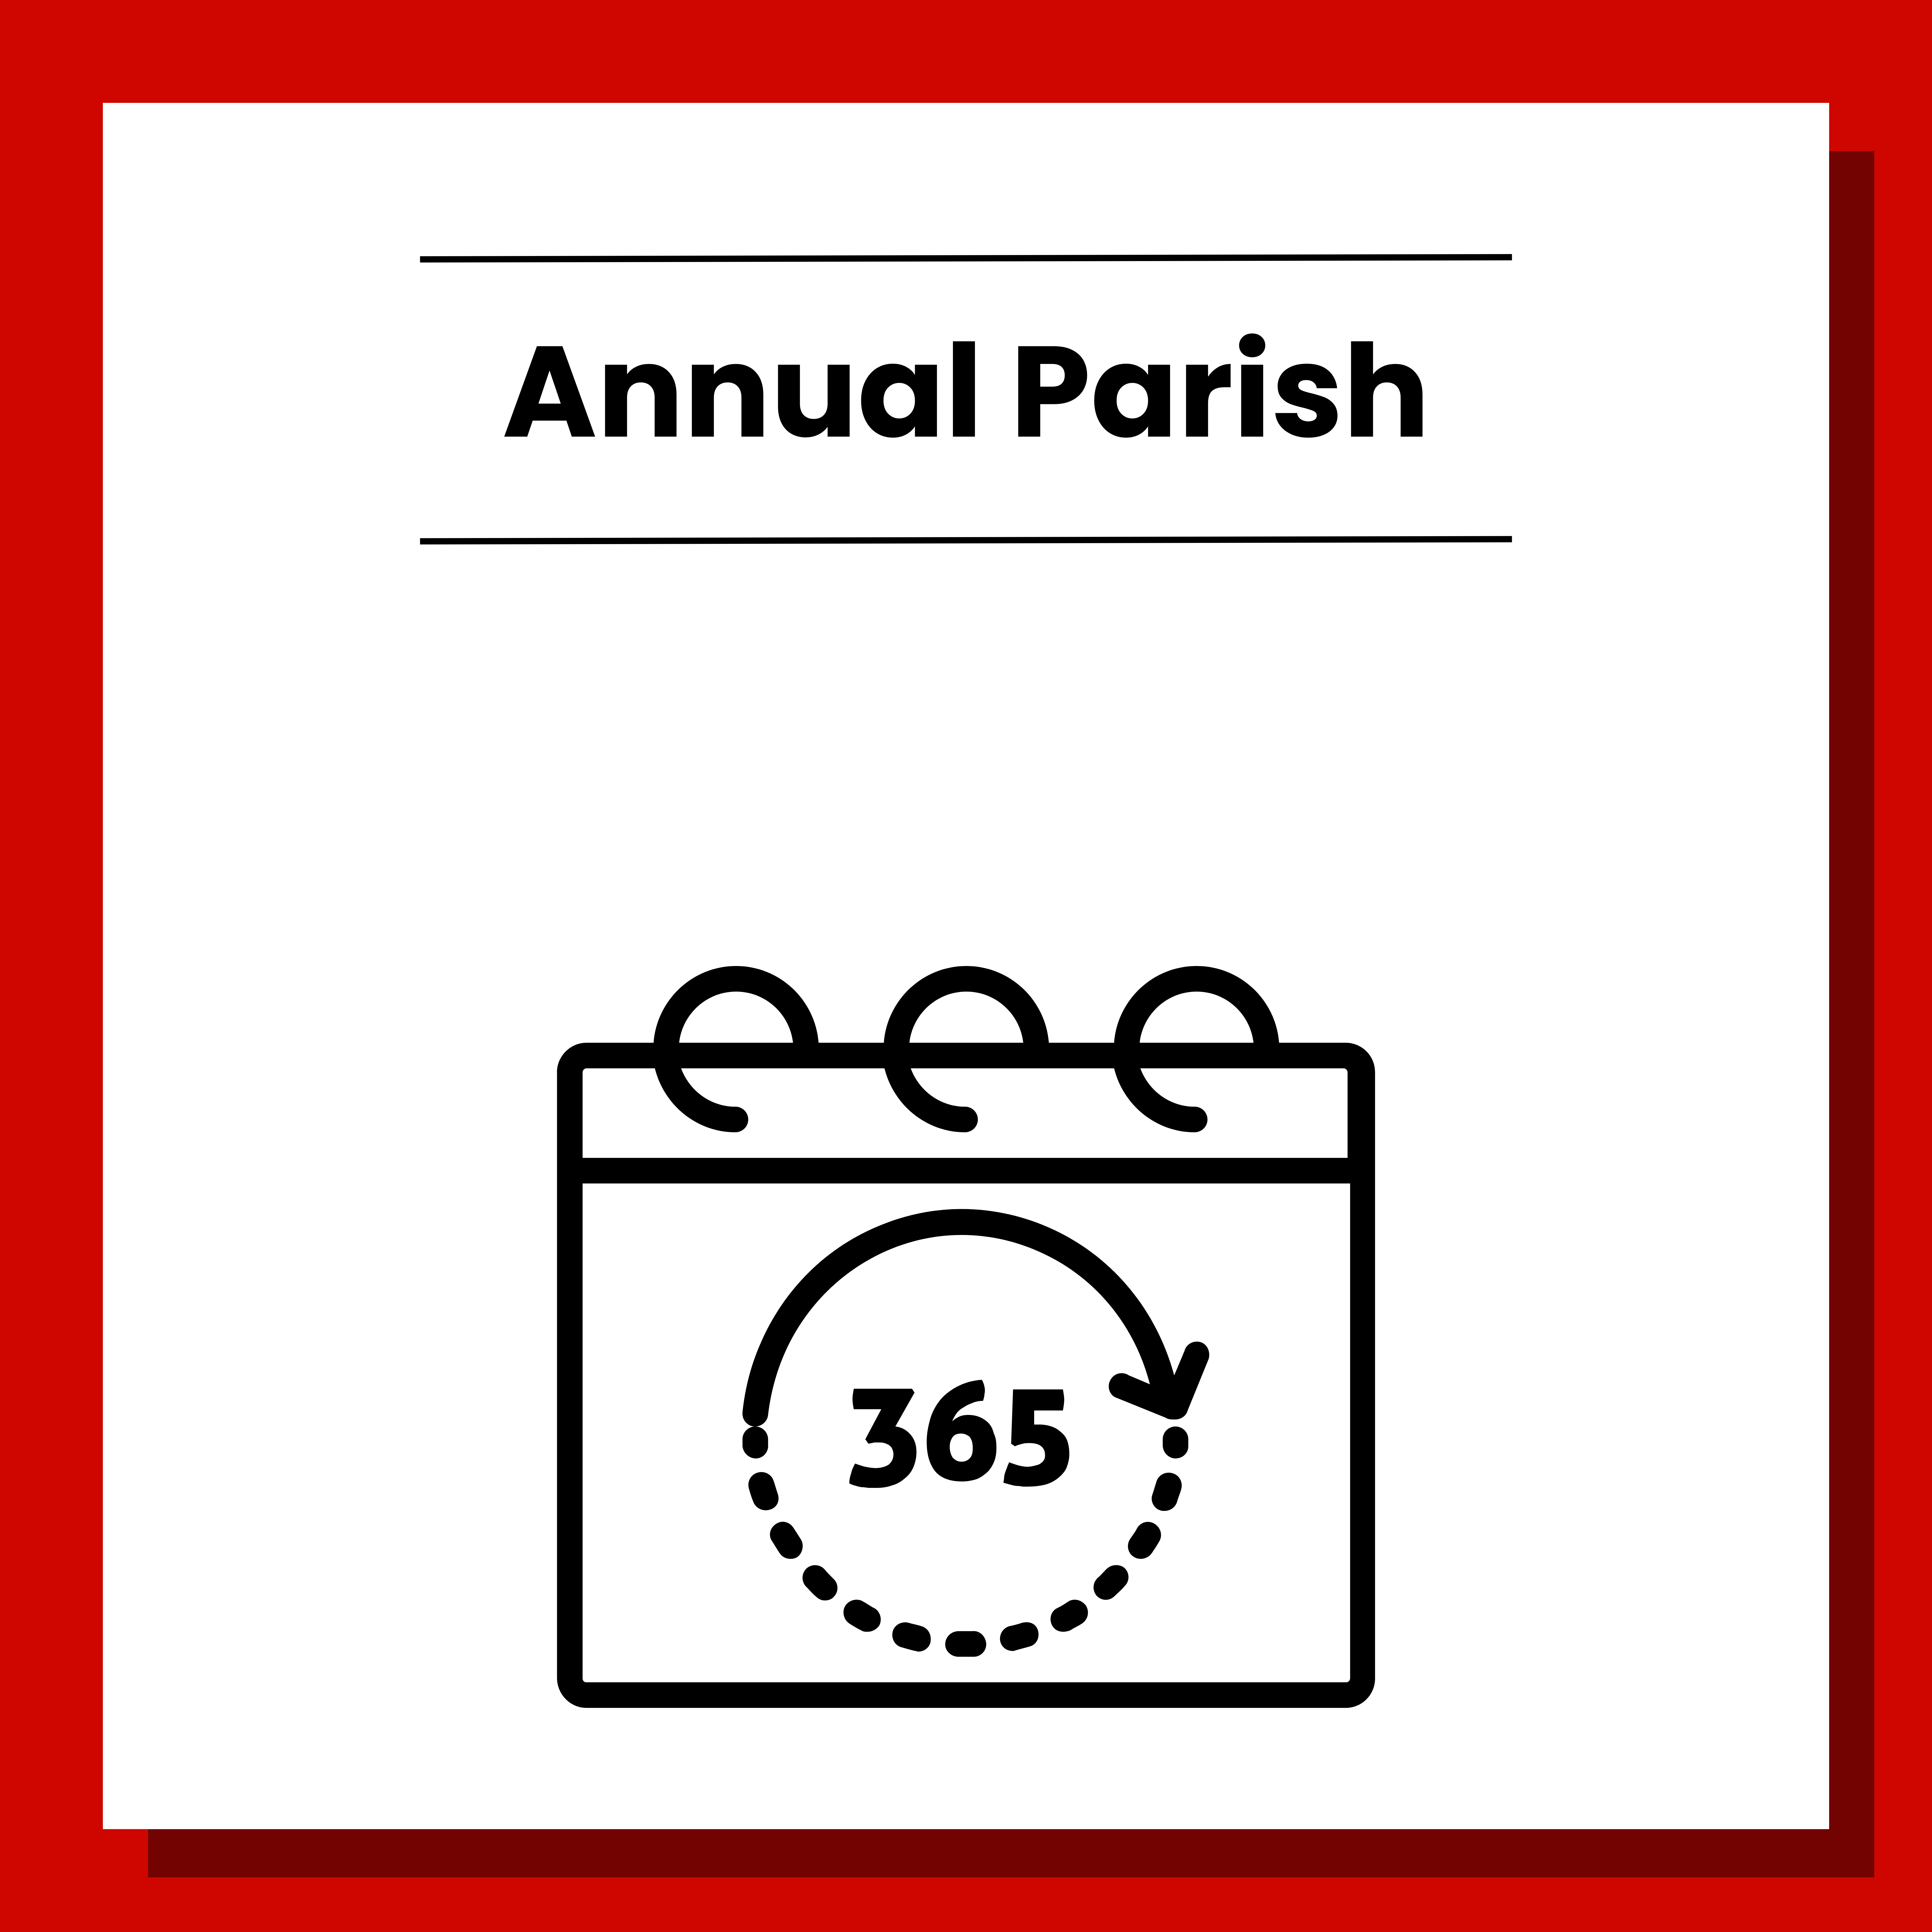 Click to view Annual Parish page.